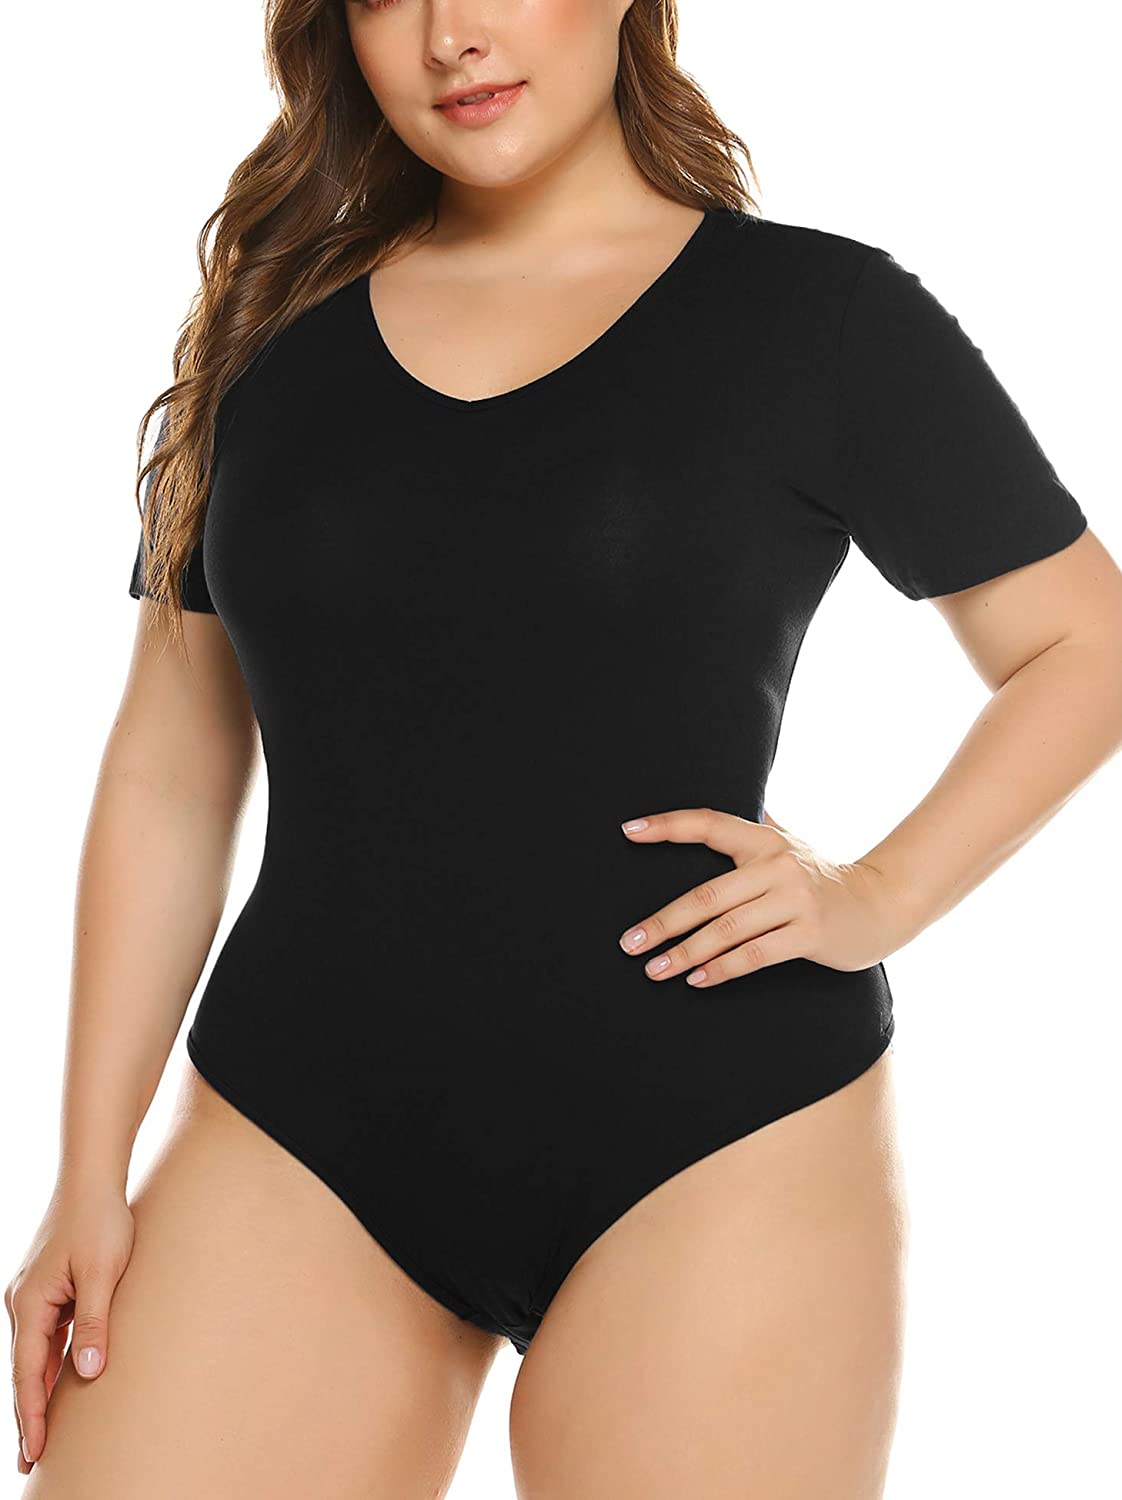 Discover Plus Size Bodysuits for Women - Affordable & Flattering